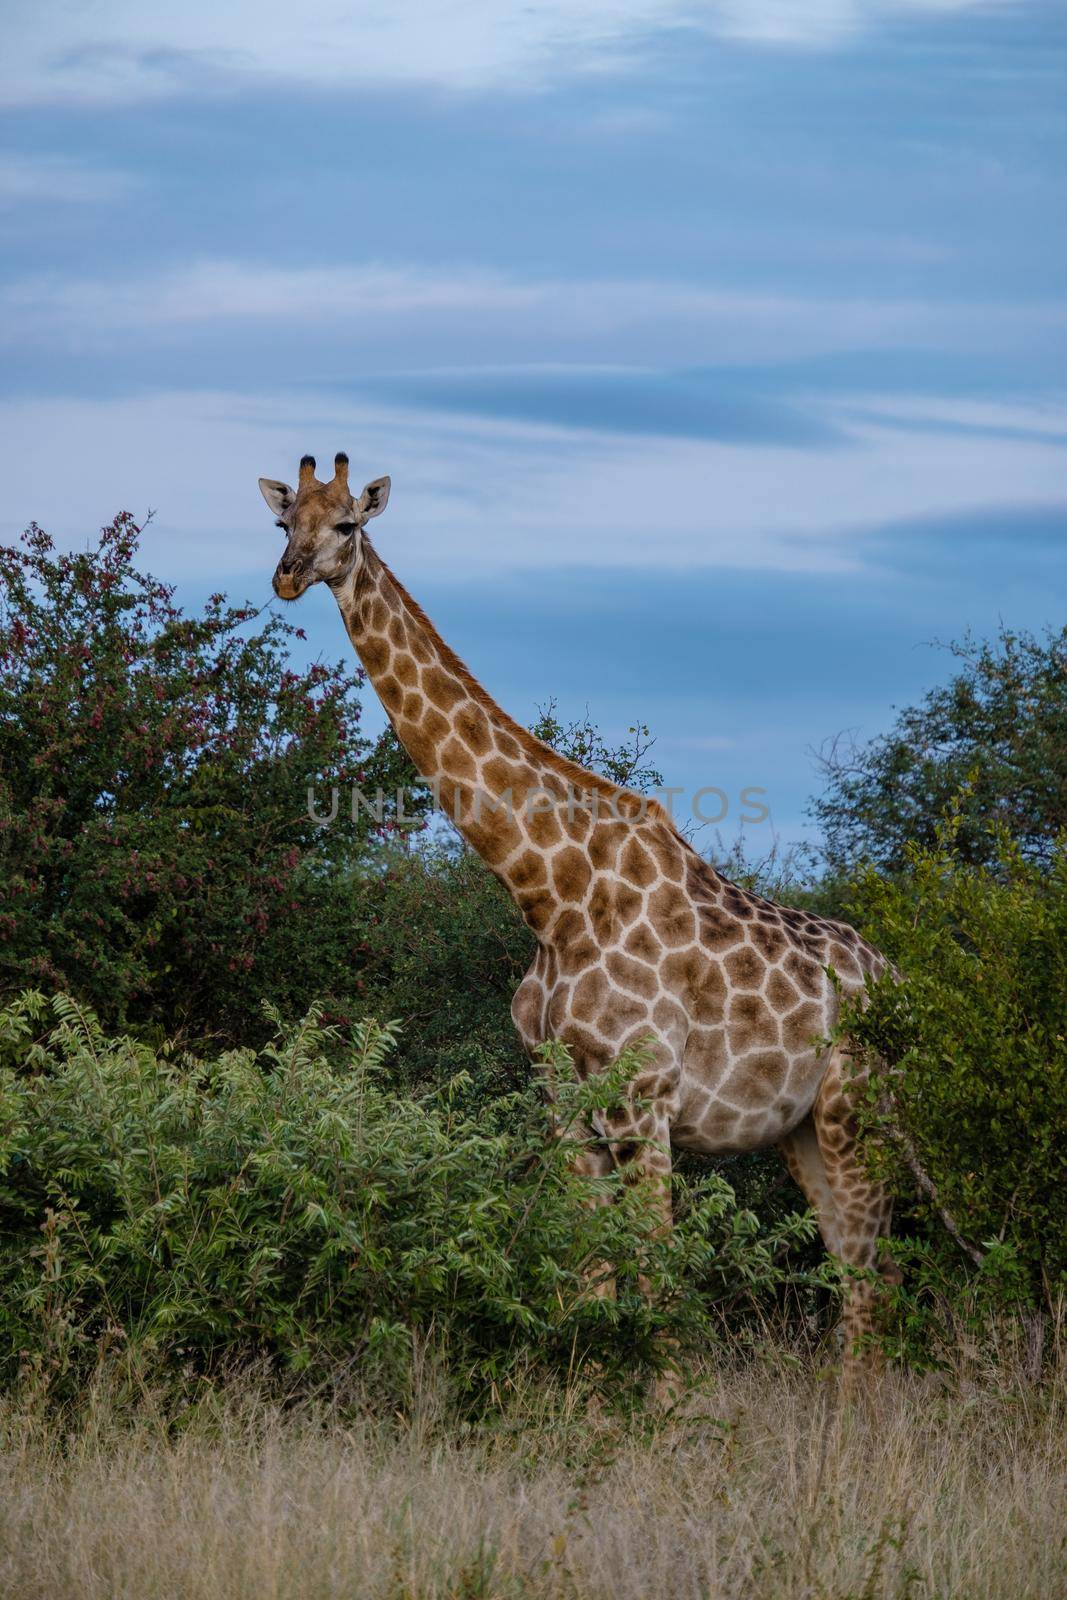 Giraffe at a Savannah landscape during sunset in South Africa at The Klaserie Private Nature Reserve inside the Kruger national park South Africa by fokkebok